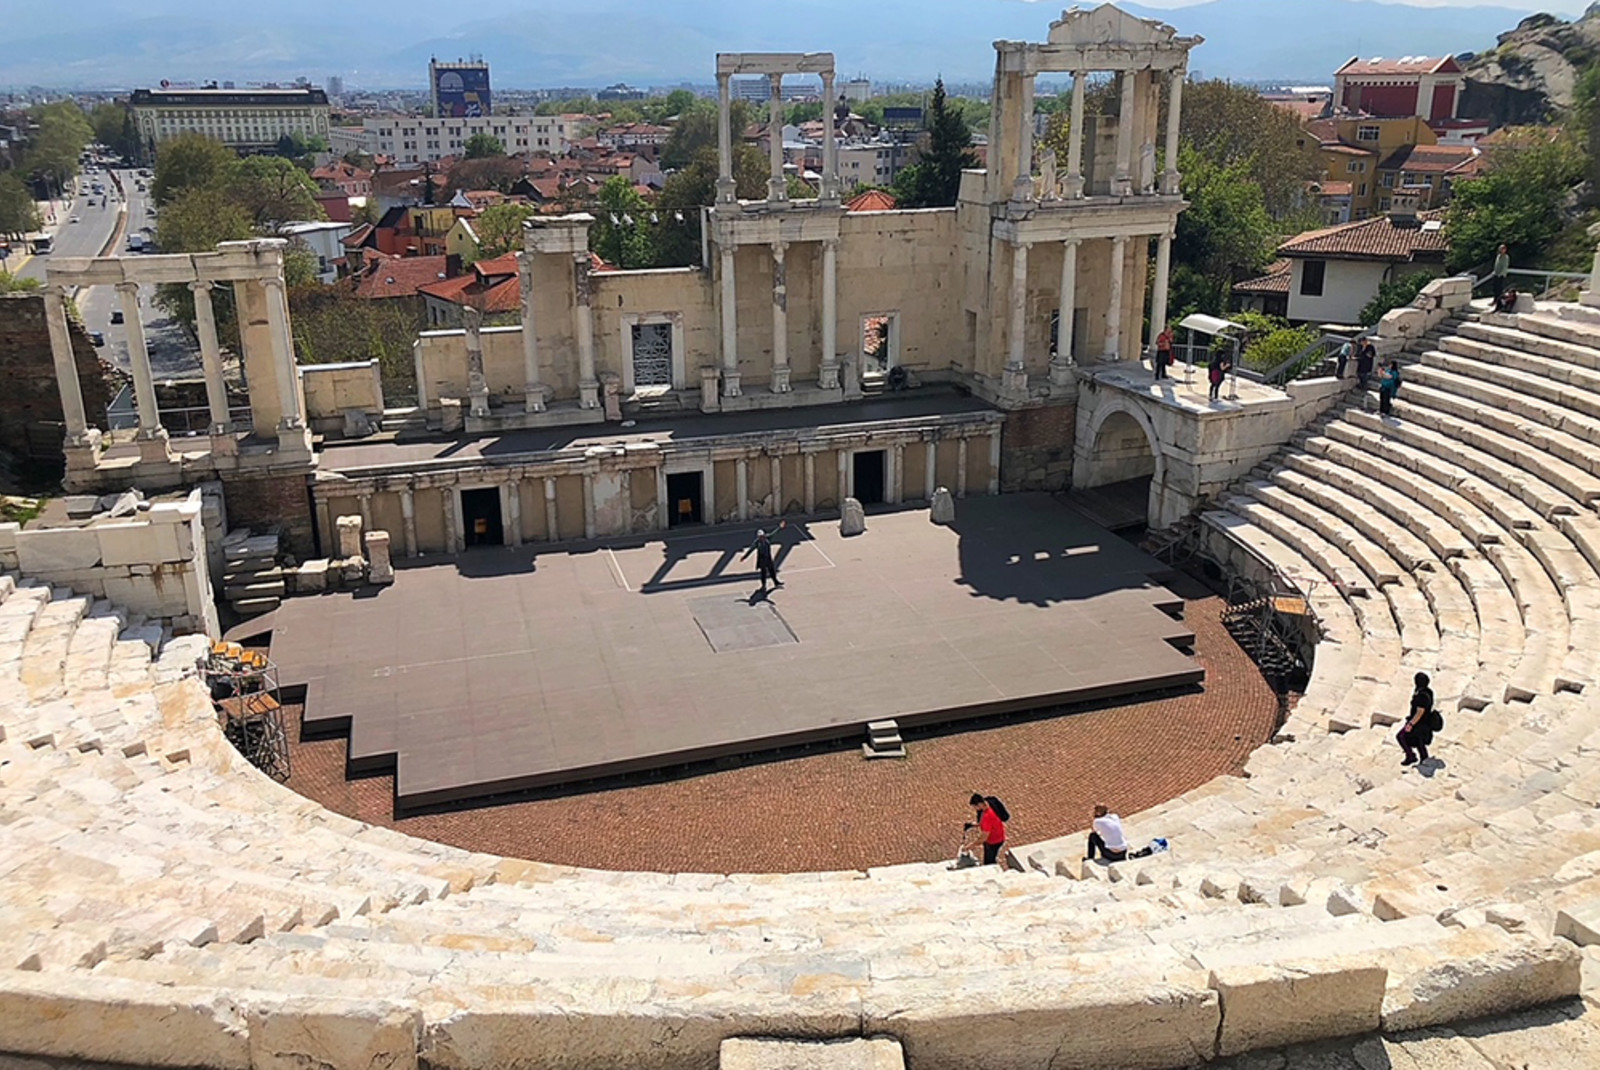 Sofia Bulgaria stone stairs ruins amphitheater small stage city view and mountains 